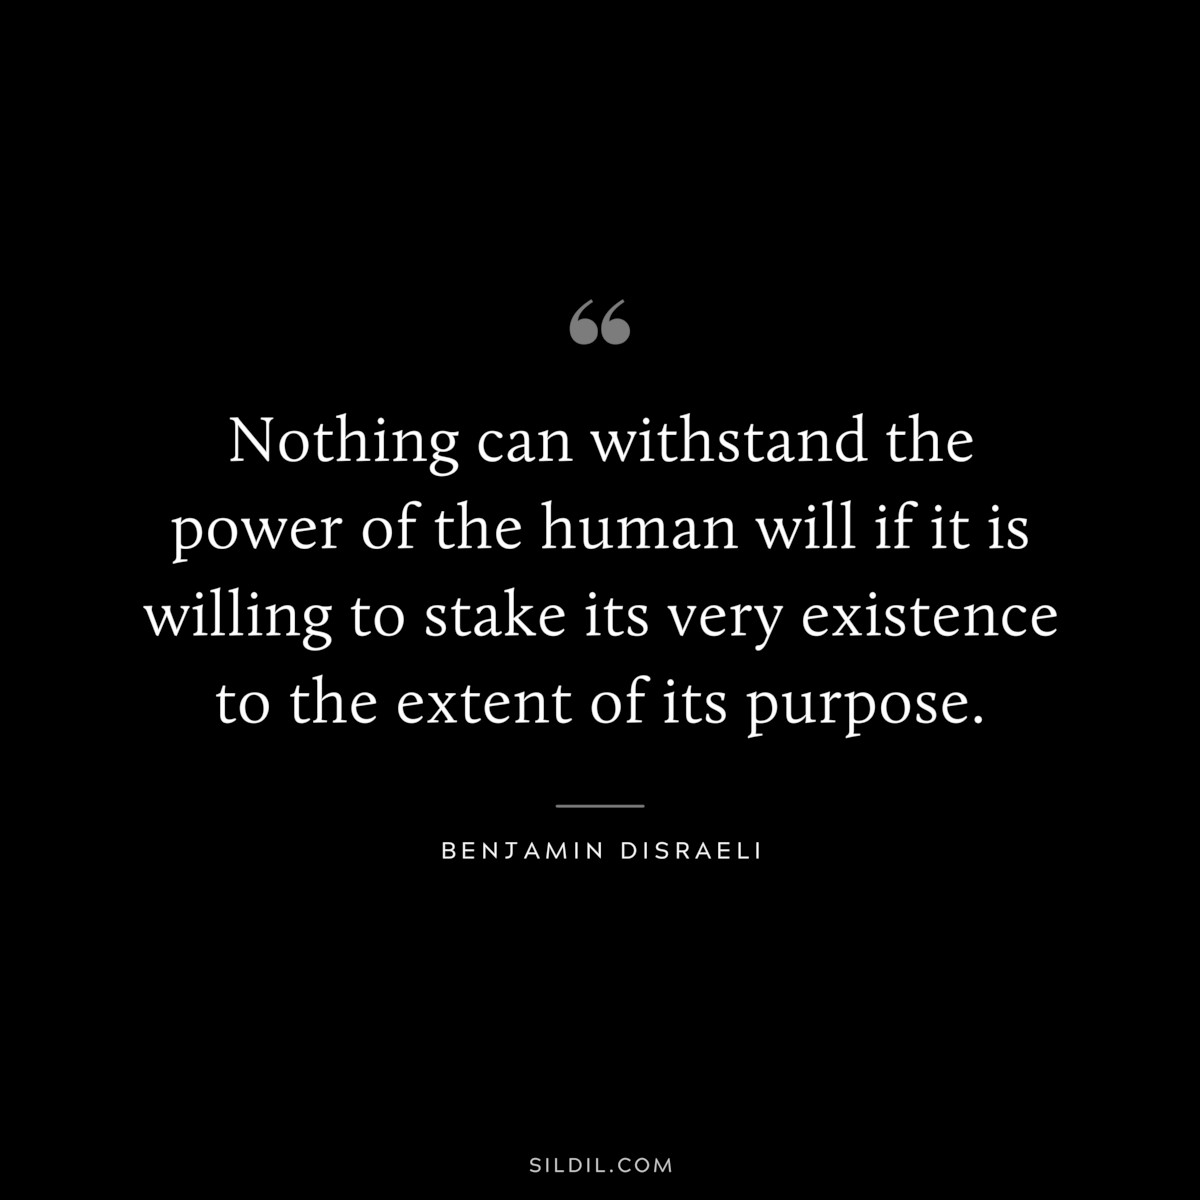 Nothing can withstand the power of the human will if it is willing to stake its very existence to the extent of its purpose. ― Benjamin Disraeli